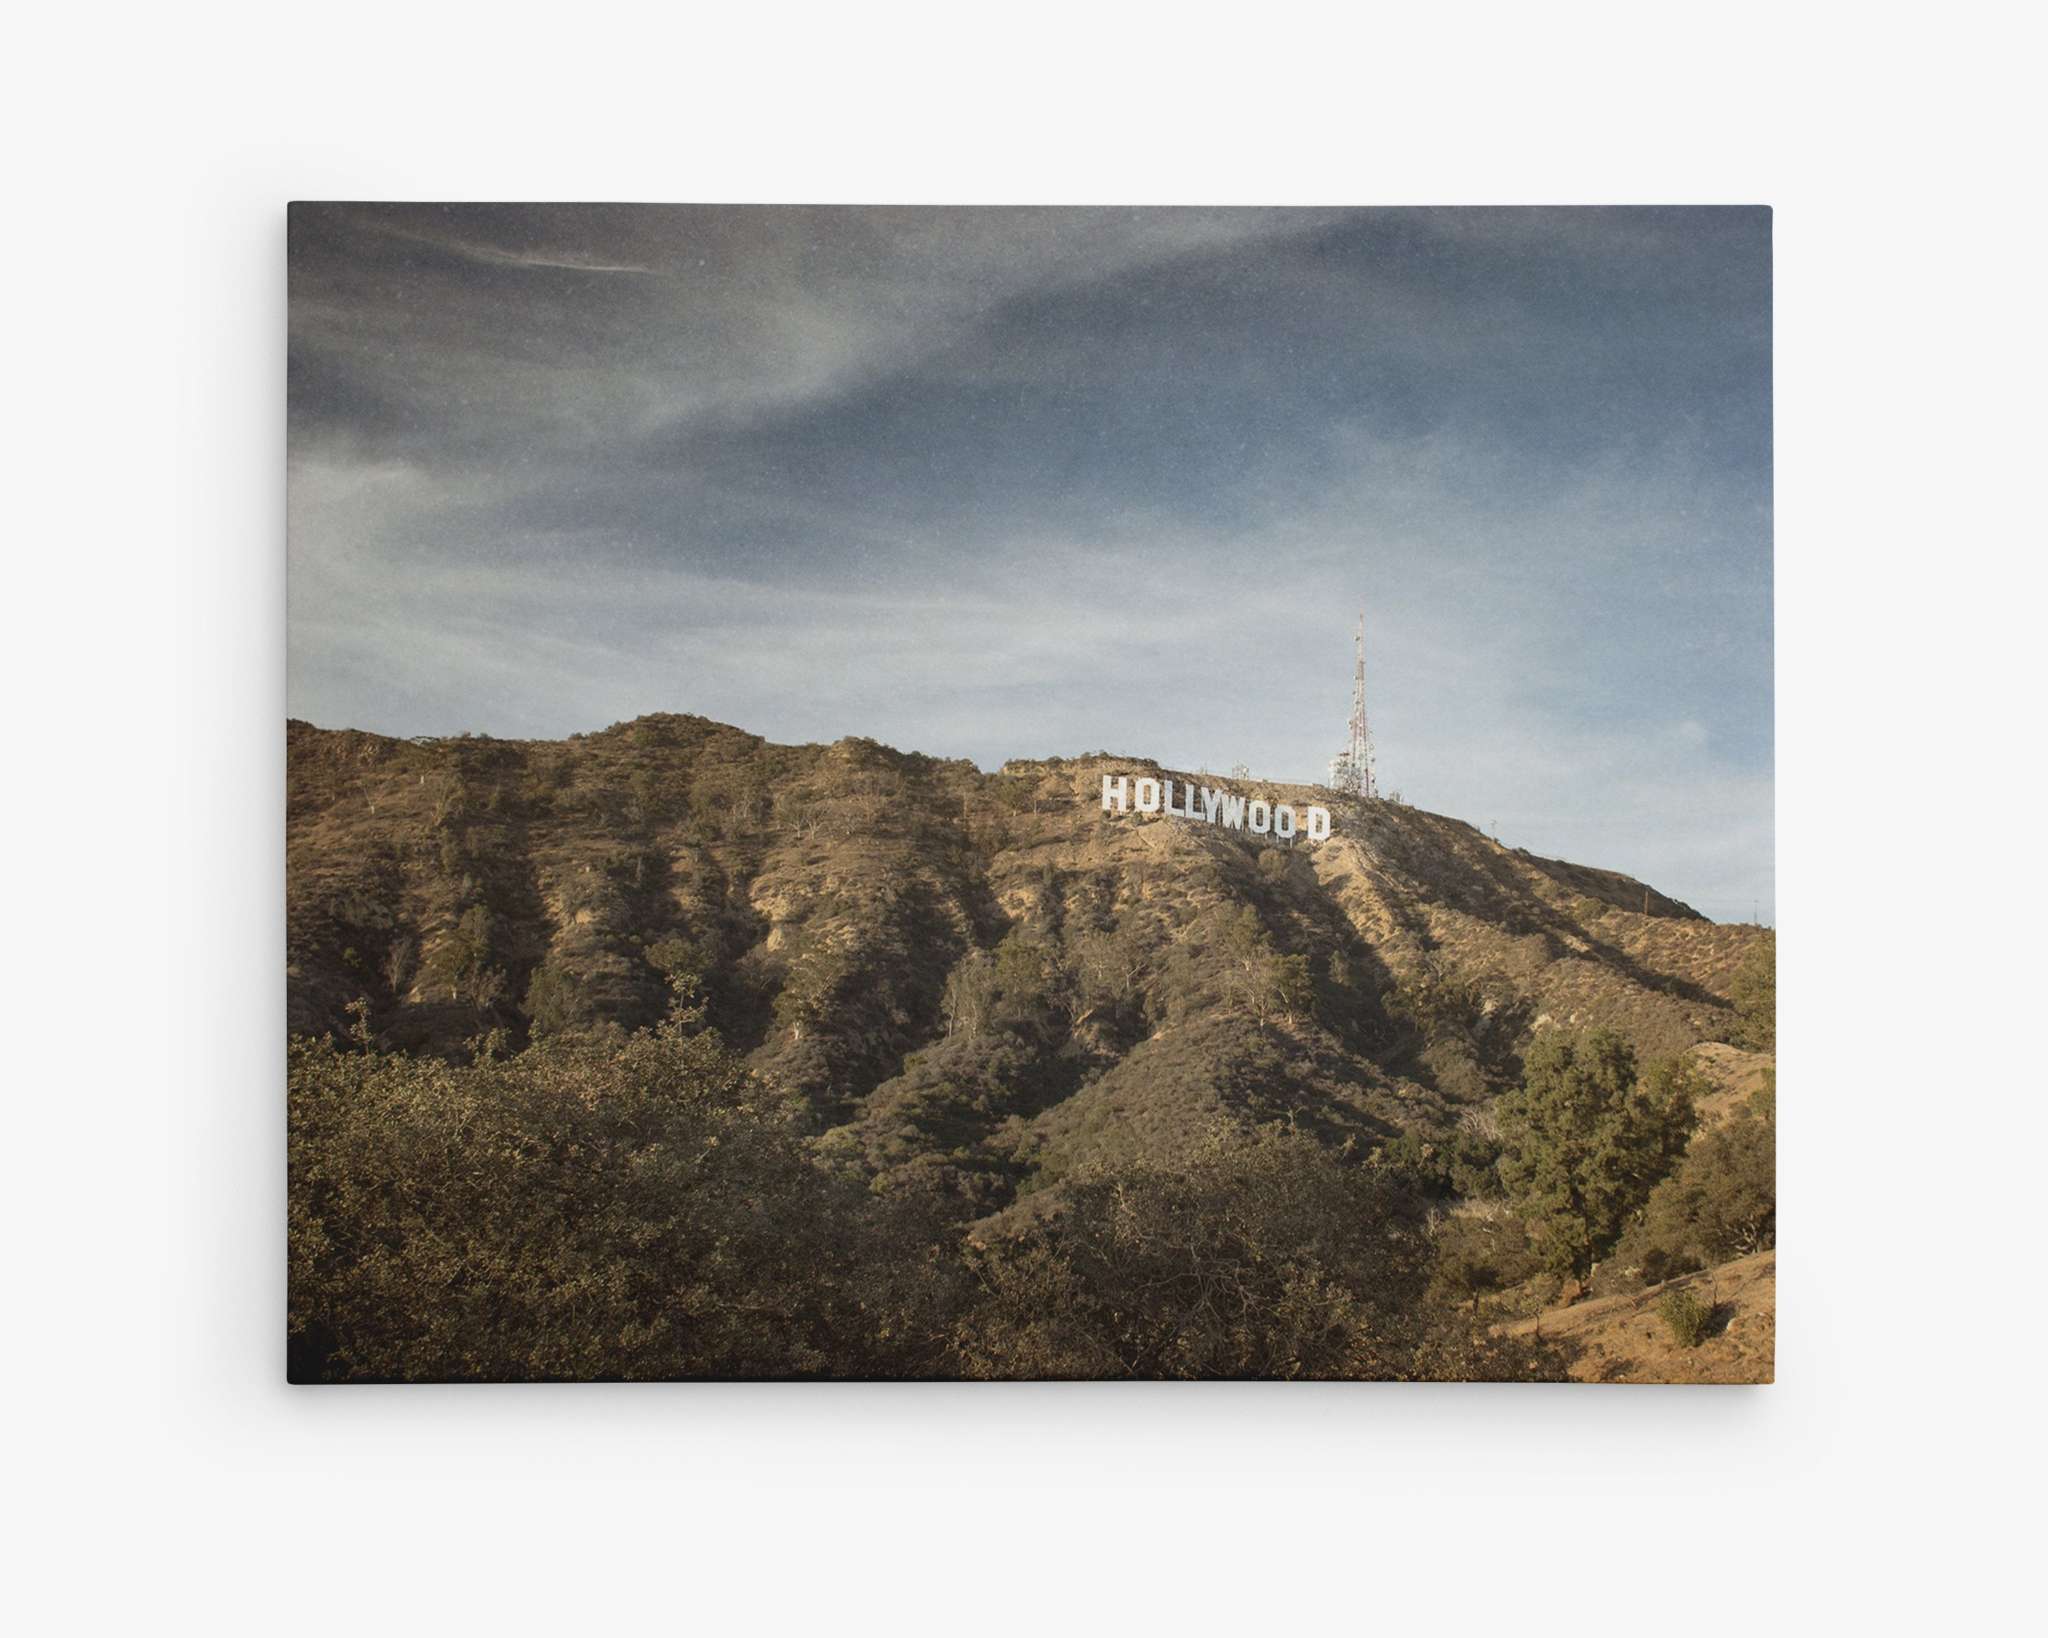 The image, showcased on a premium artist-grade canvas, depicts the iconic Hollywood sign situated on the hills with a background of a partially cloudy sky. The foreground features a mix of trees and shrubbery, highlighting the natural landscape surrounding the landmark. This stunning piece is titled **Hollywood Sign Canvas Wall Art, 'Hollywood'** by **Offley Green**.